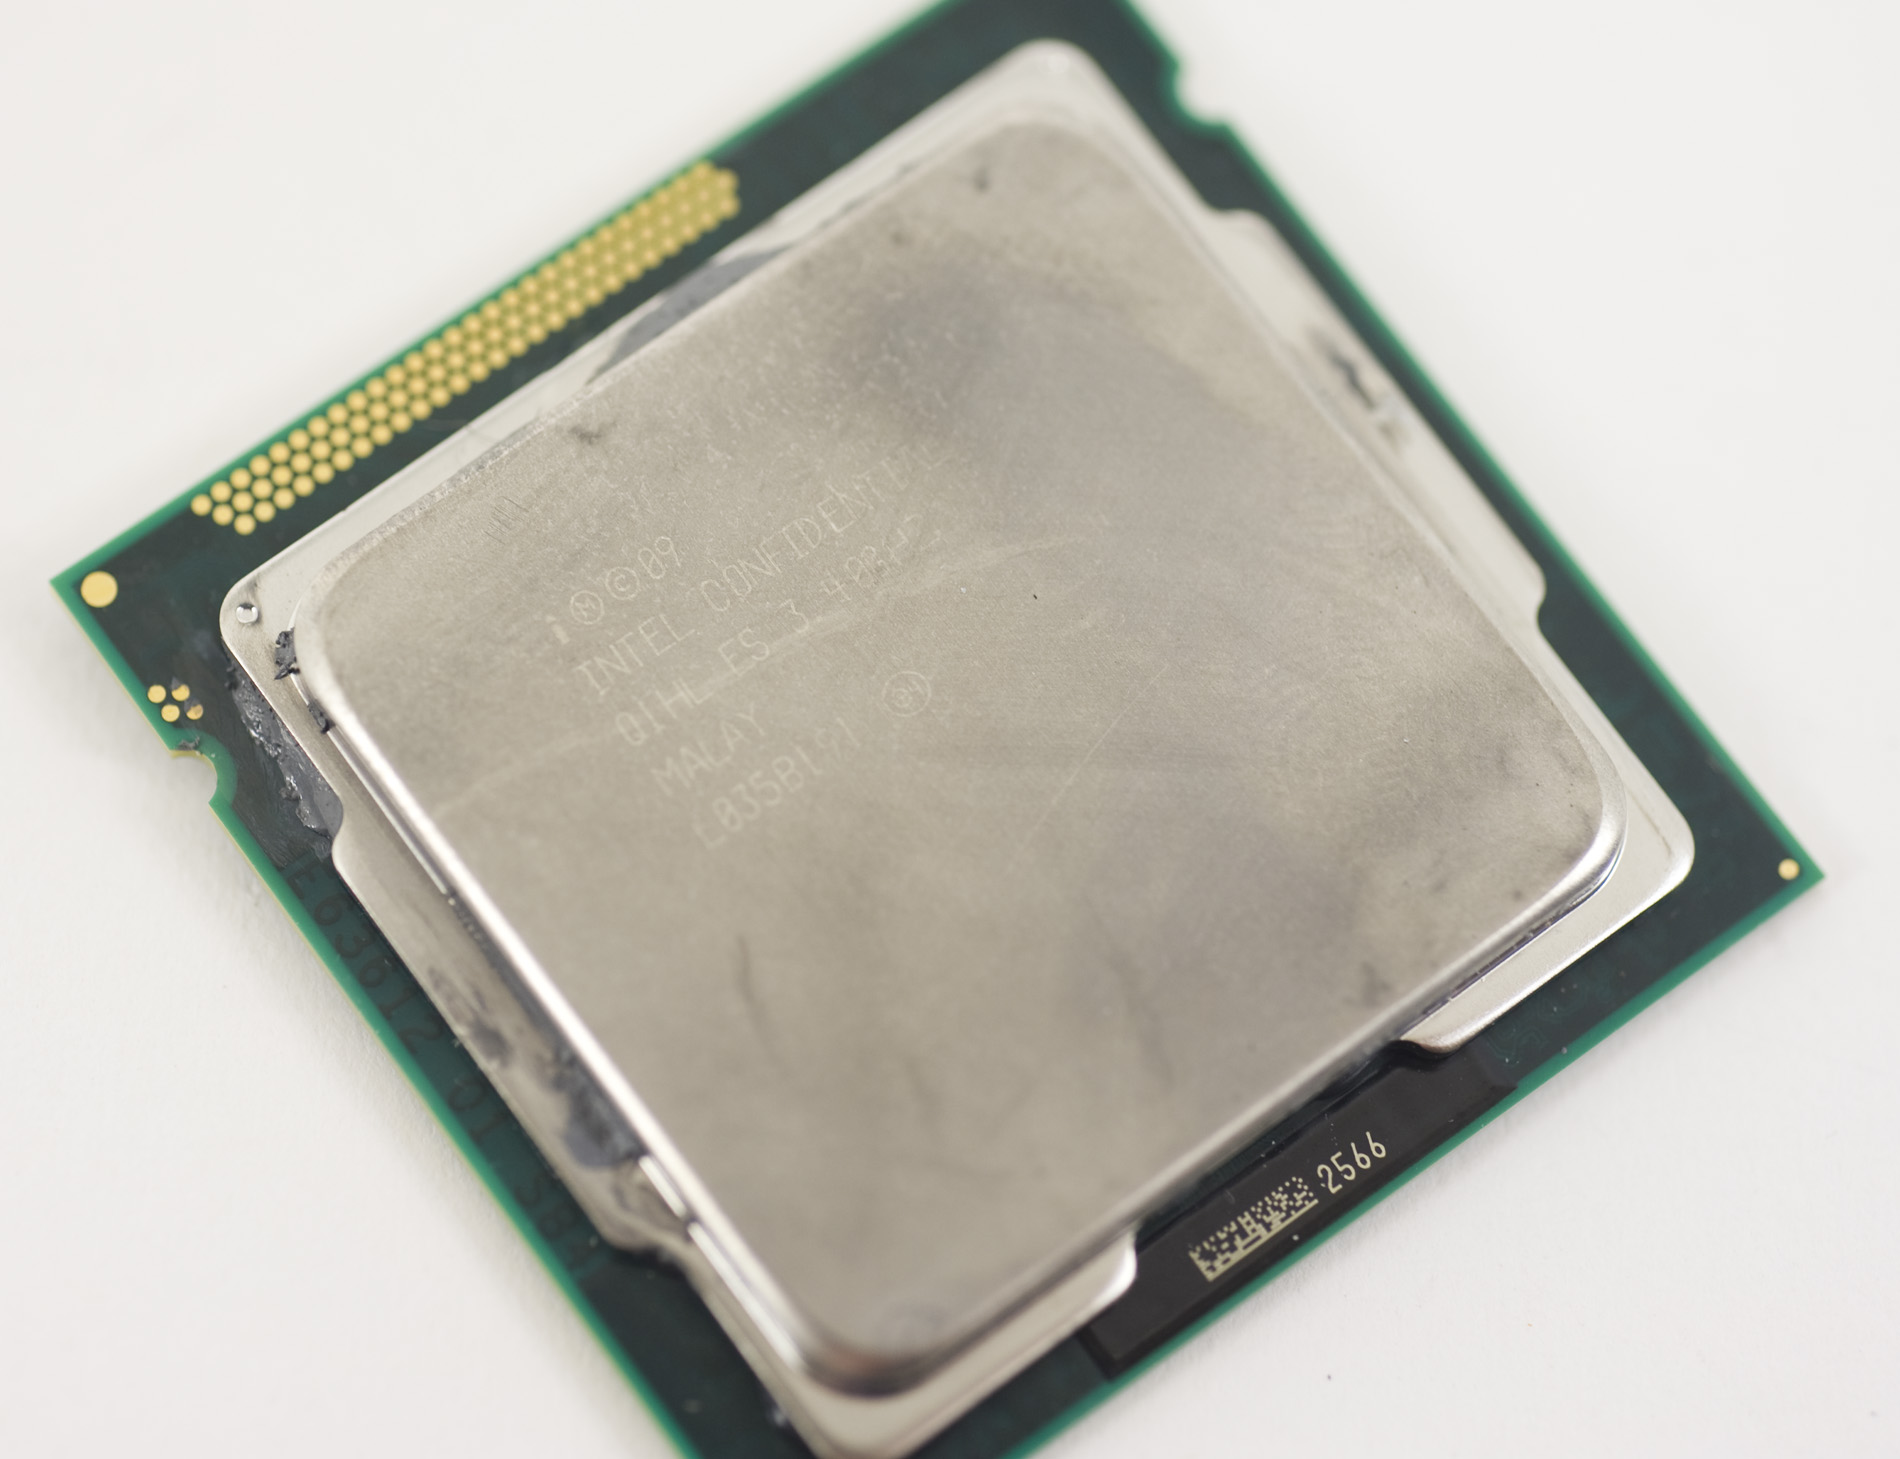 Overclocking Effortless 4 4ghz On Air The Sandy Bridge Review Intel Core I7 2600k I5 2500k And Core I3 2100 Tested